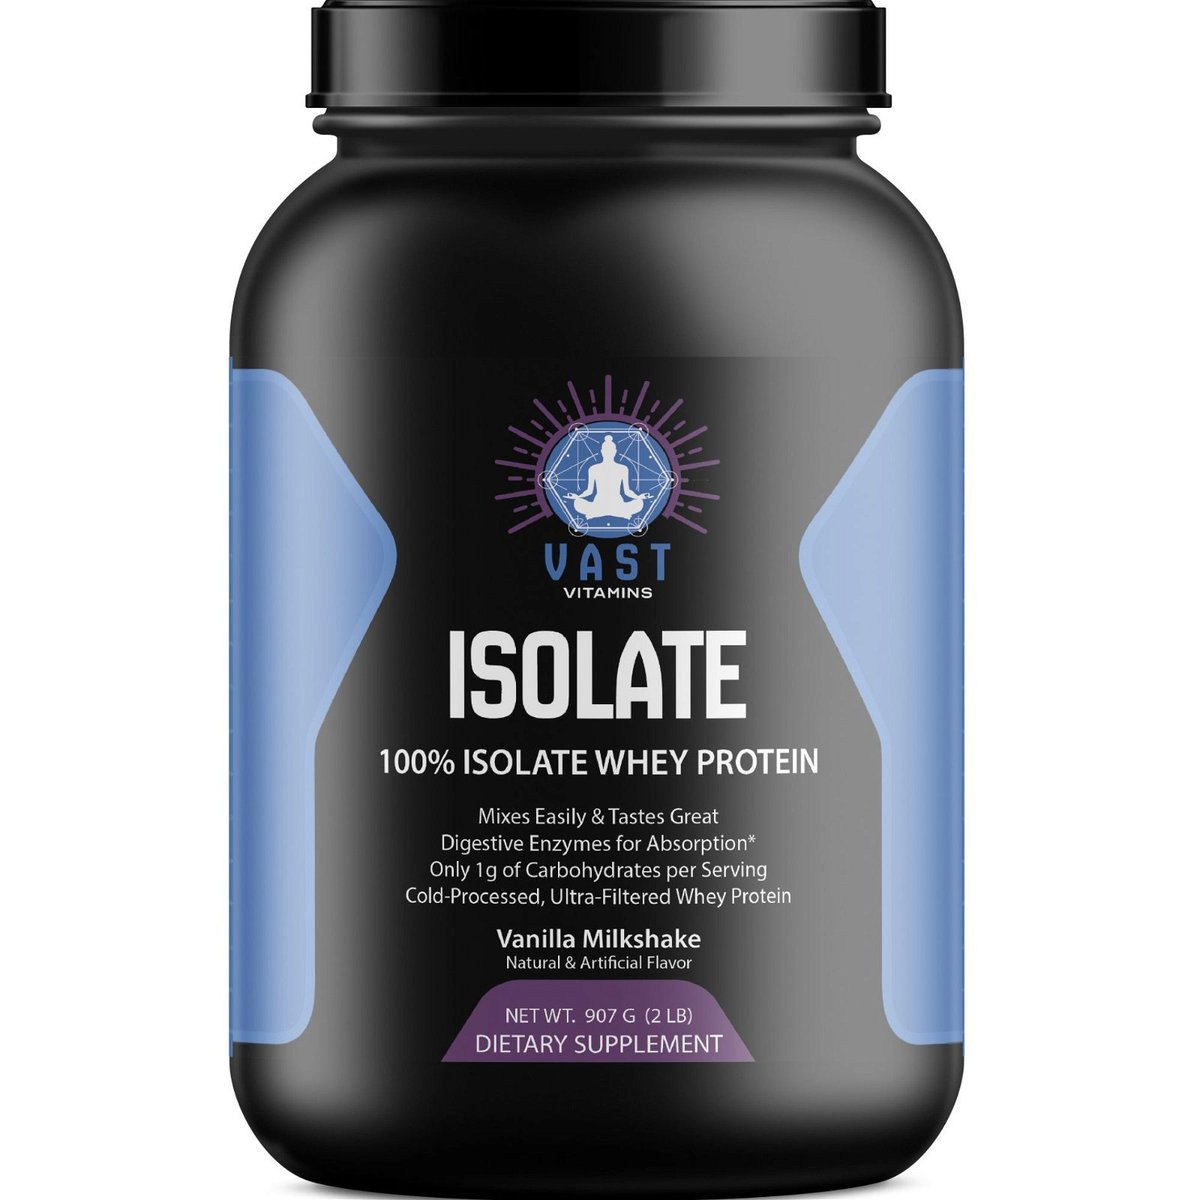 Fuel your fitness journey with our delicious 100% Isolate Whey Protein Vanilla Milkshake. 💪 Get amazing results with just 2 scoops and start seeing progress! All for just $69.99! #proteinpacked